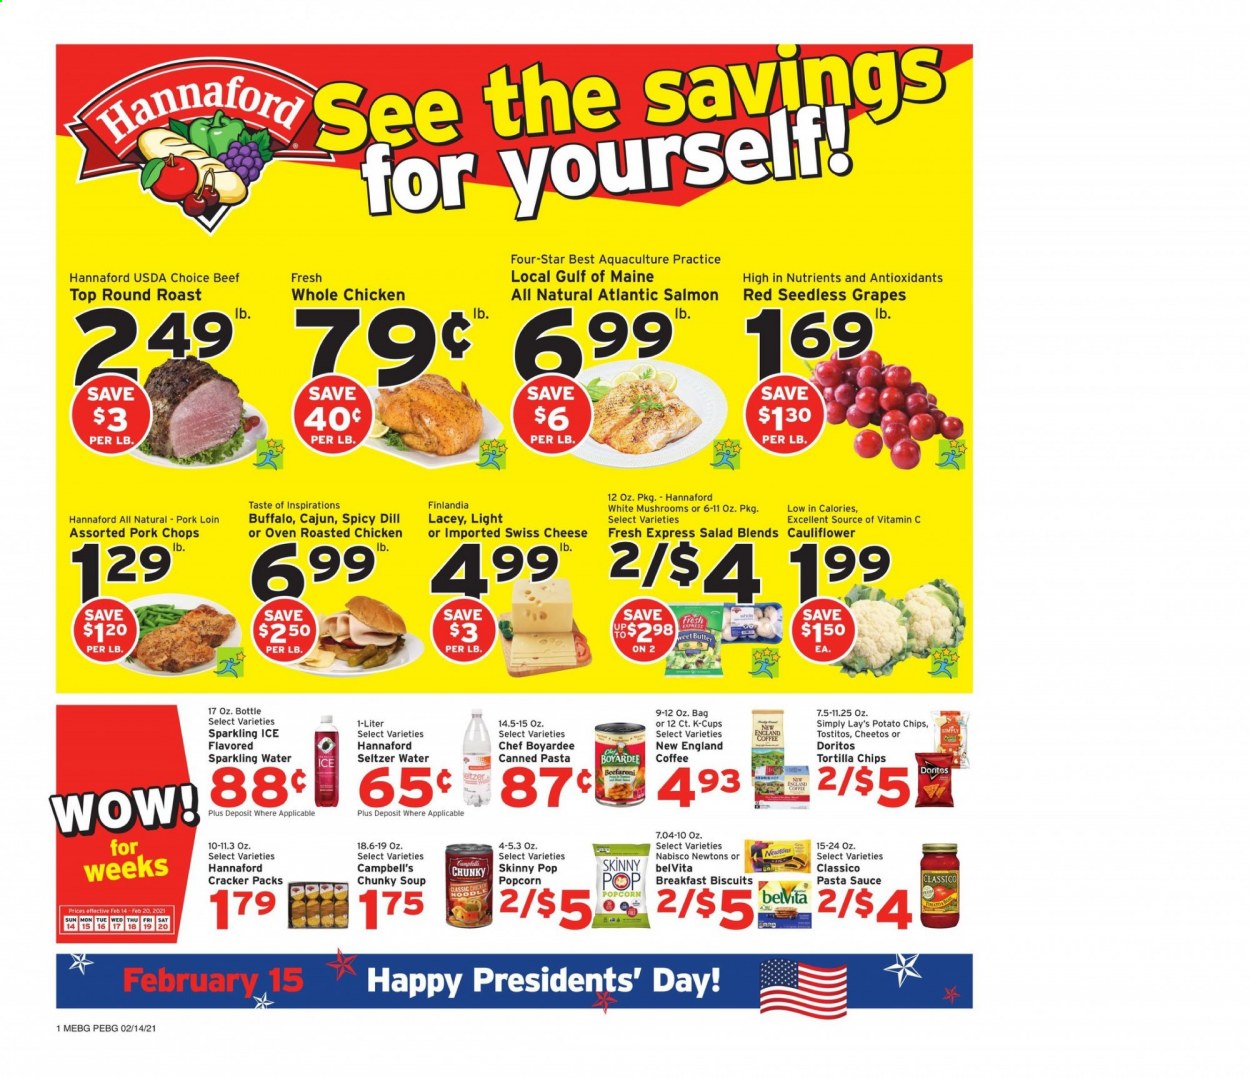 thumbnail - Hannaford Flyer - 02/14/2021 - 02/20/2021 - Sales products - mushrooms, seedless grapes, salmon, Campbell's, soup, salad, sauce, swiss cheese, cheese, cauliflower, crackers, biscuit, Doritos, tortilla chips, potato chips, Cheetos, chips, Lay’s, popcorn, Tostitos, Skinny Pop, Chef Boyardee, belVita, dill, pasta sauce, seltzer water, sparkling water, coffee, coffee capsules, K-Cups, whole chicken, beef meat, round roast, pork chops, pork loin, pork meat, vitamin c. Page 1.